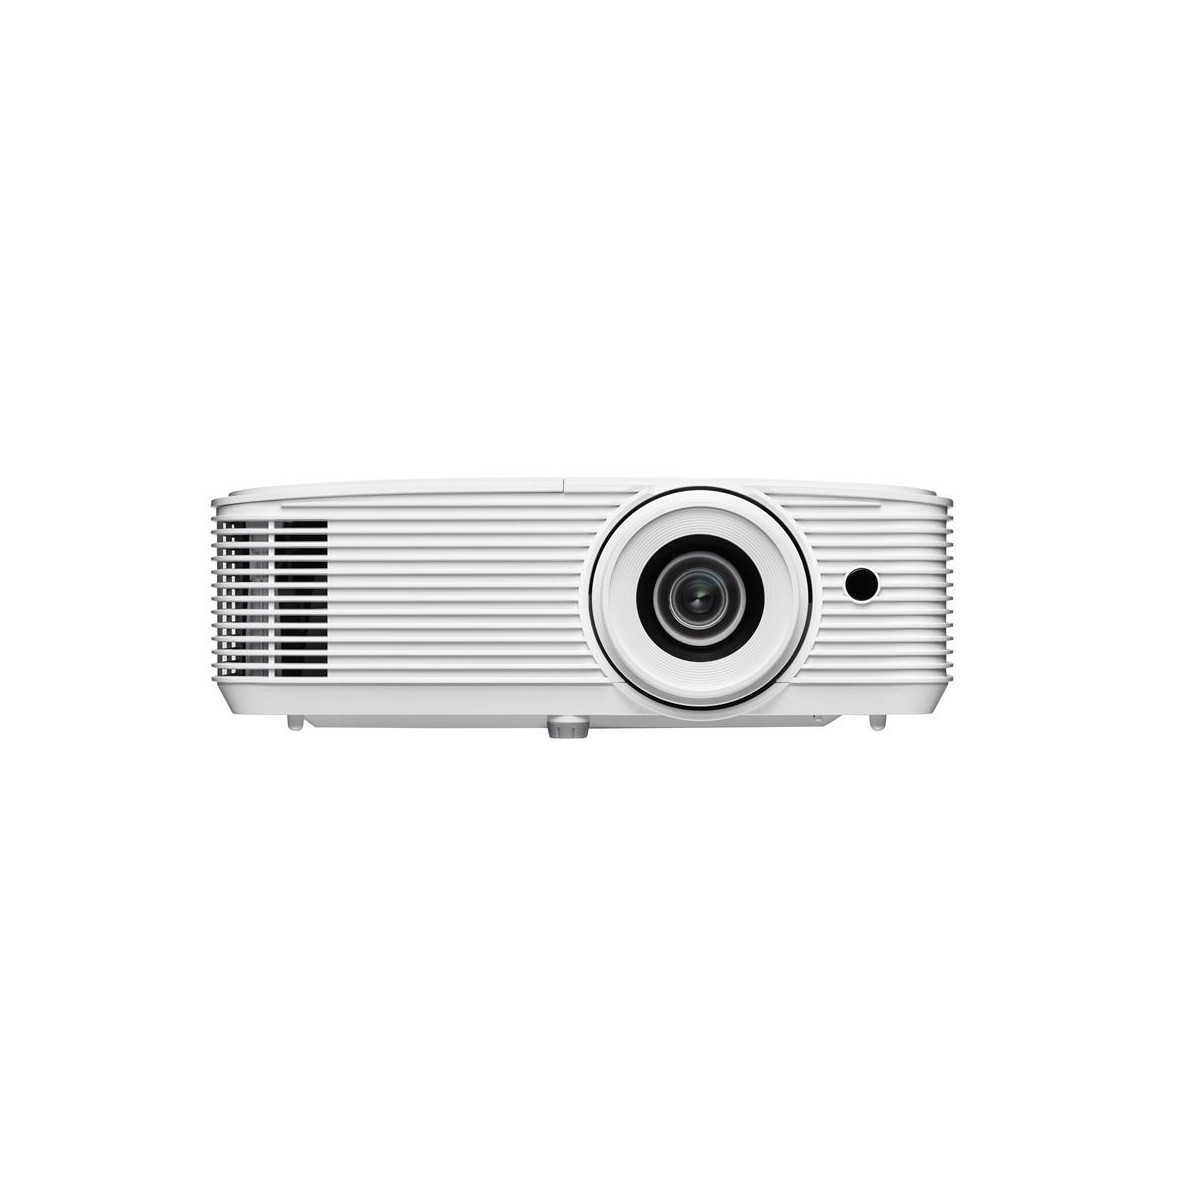 Optoma EH401 Projector FHD 4000lm - Projector